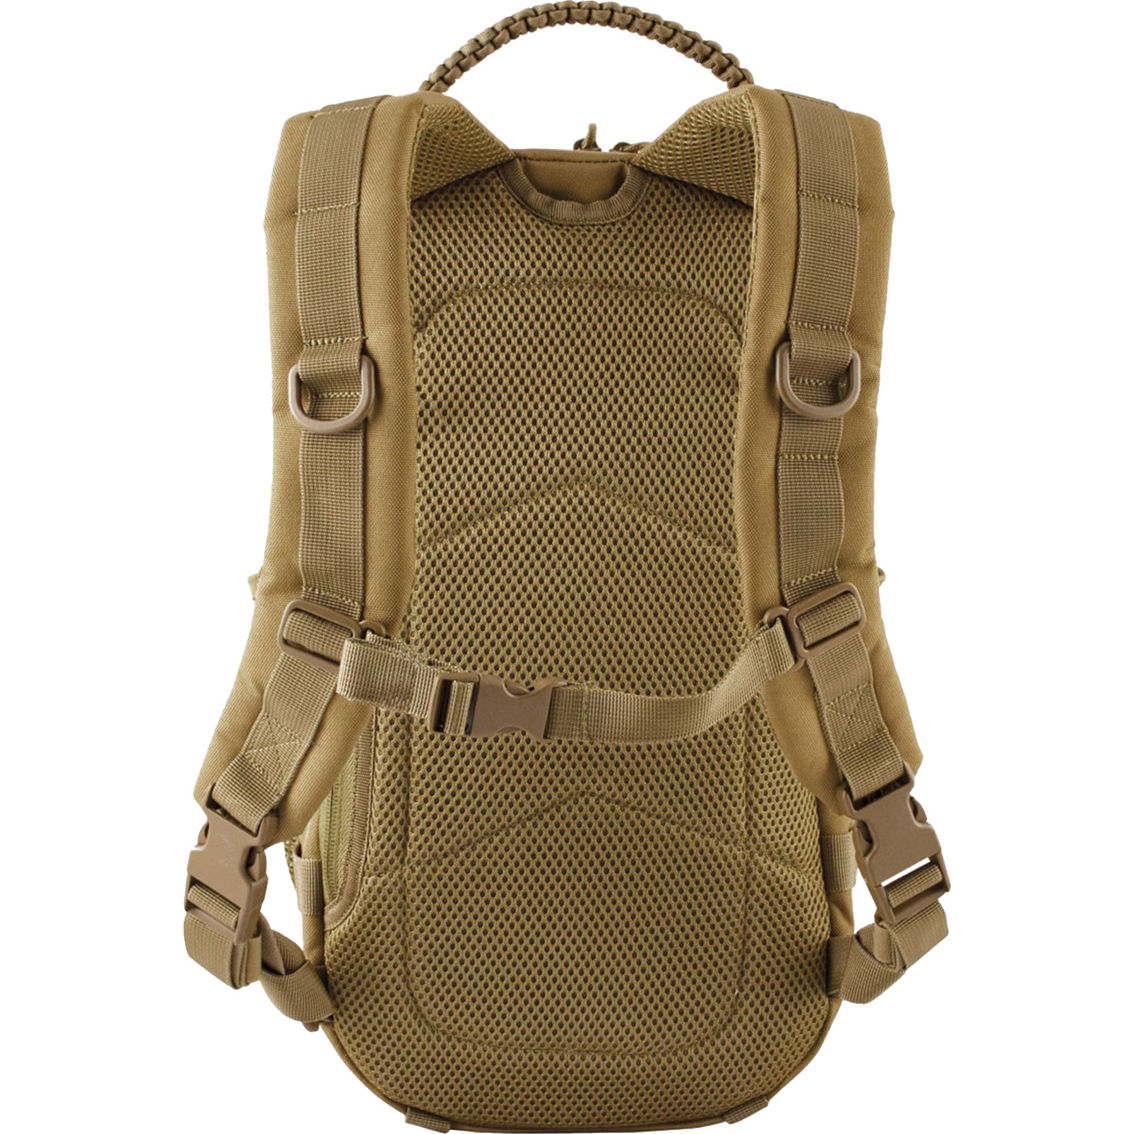 Red Rock Outdoor Gear Ambush Pack - Image 2 of 8